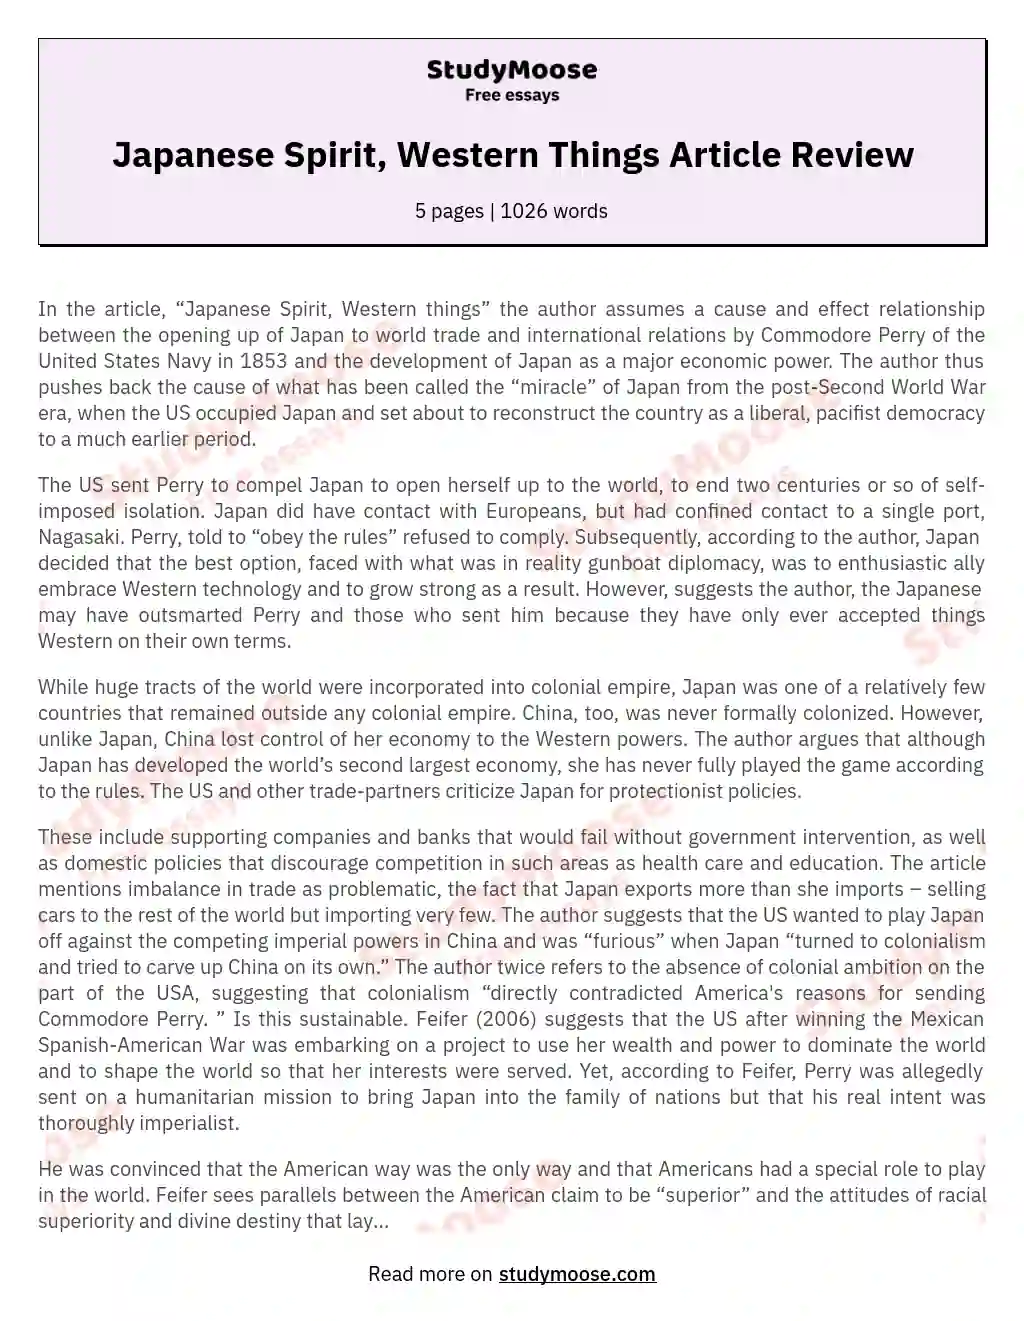 Japanese Spirit, Western Things Article Review